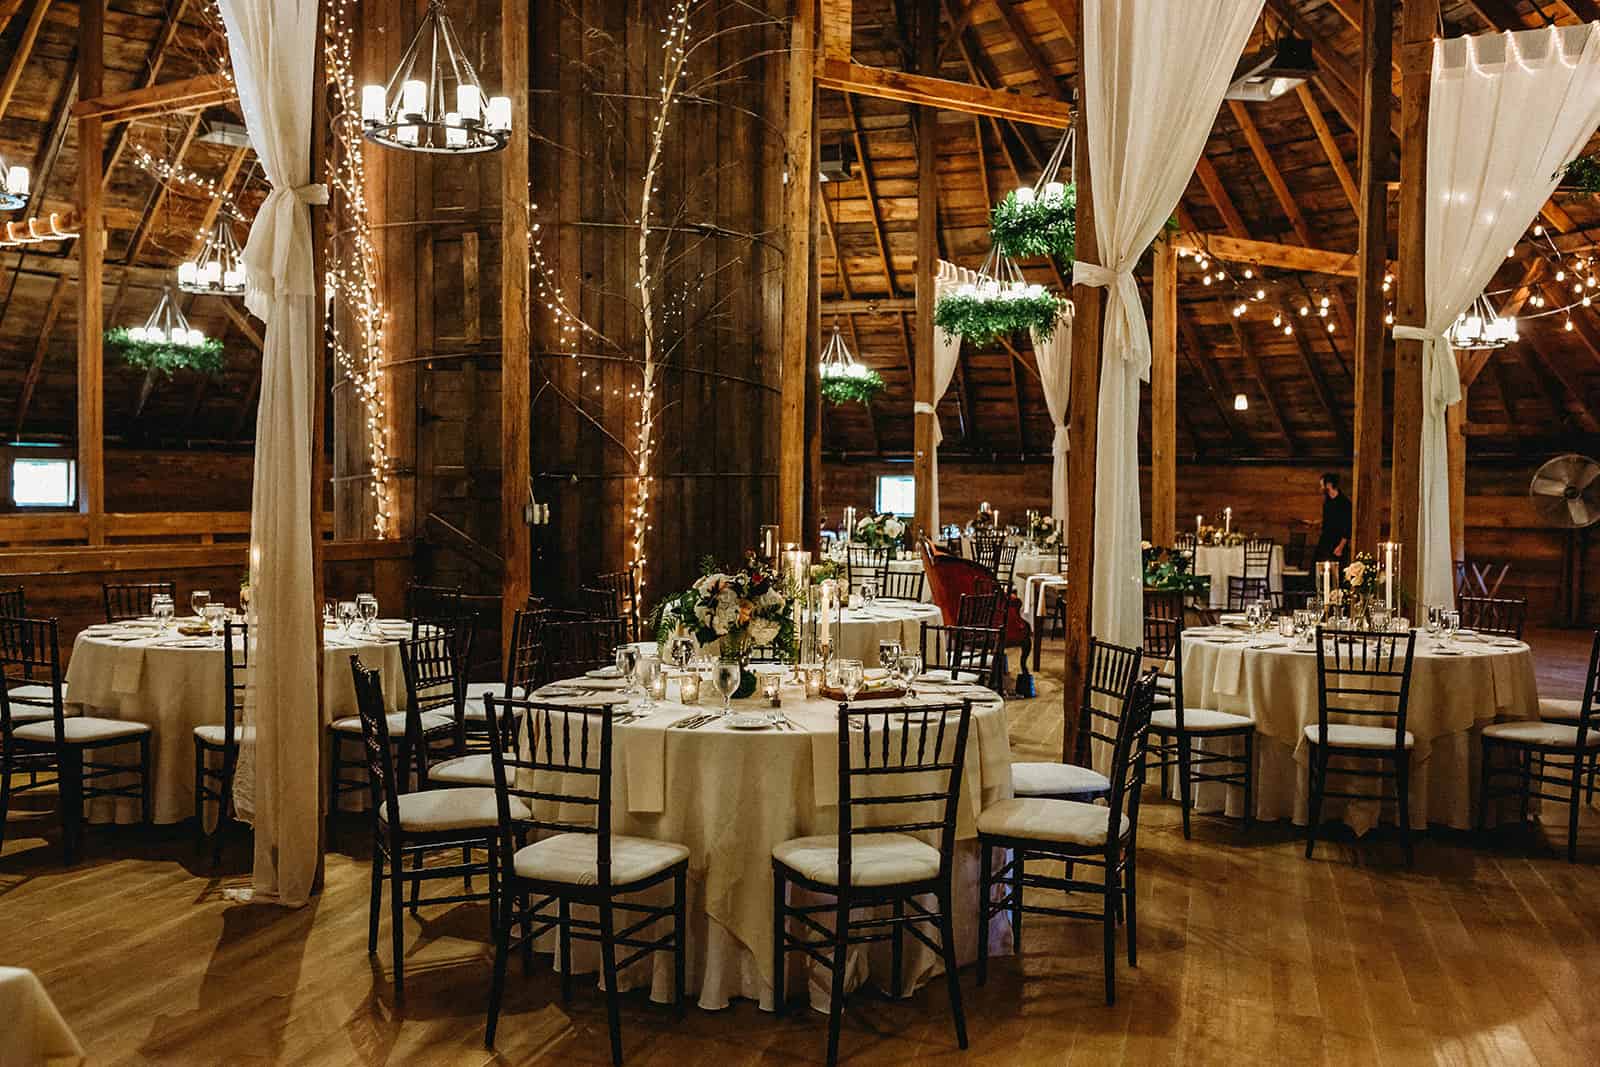 Inn at the Round Barn Farm - Wedding Reception with Round Tables